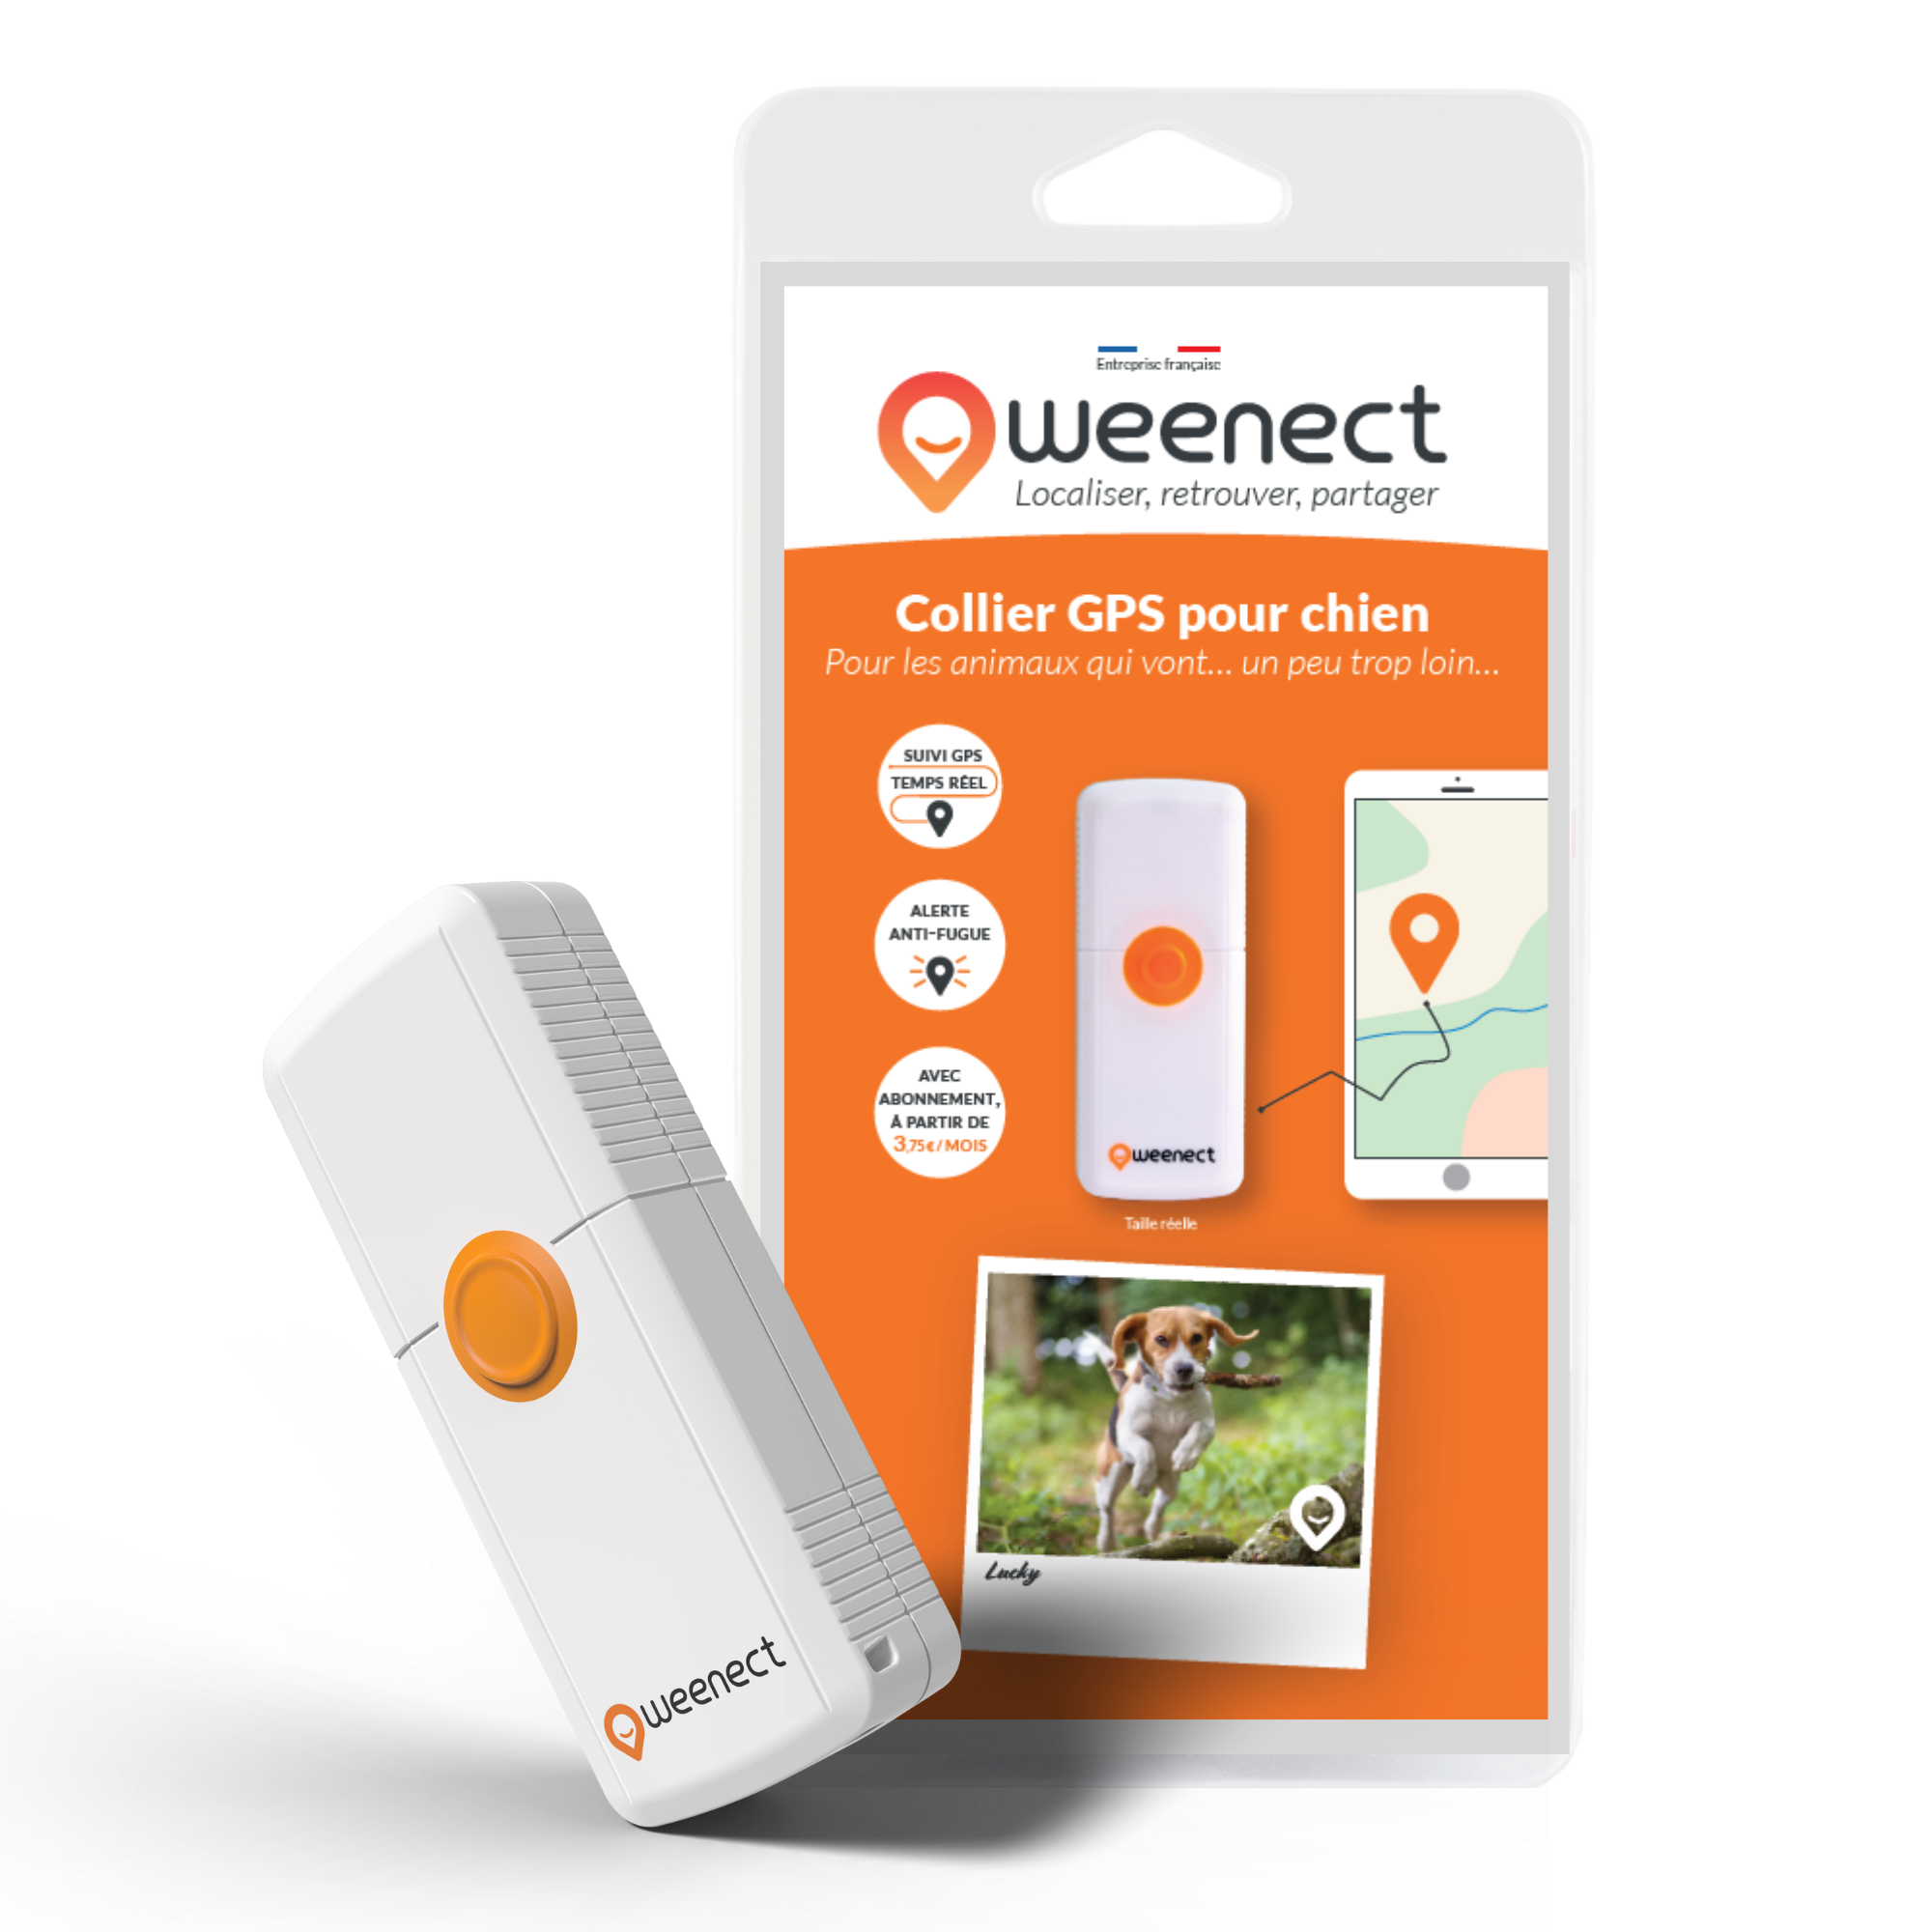 Weenect collier gps pour chien